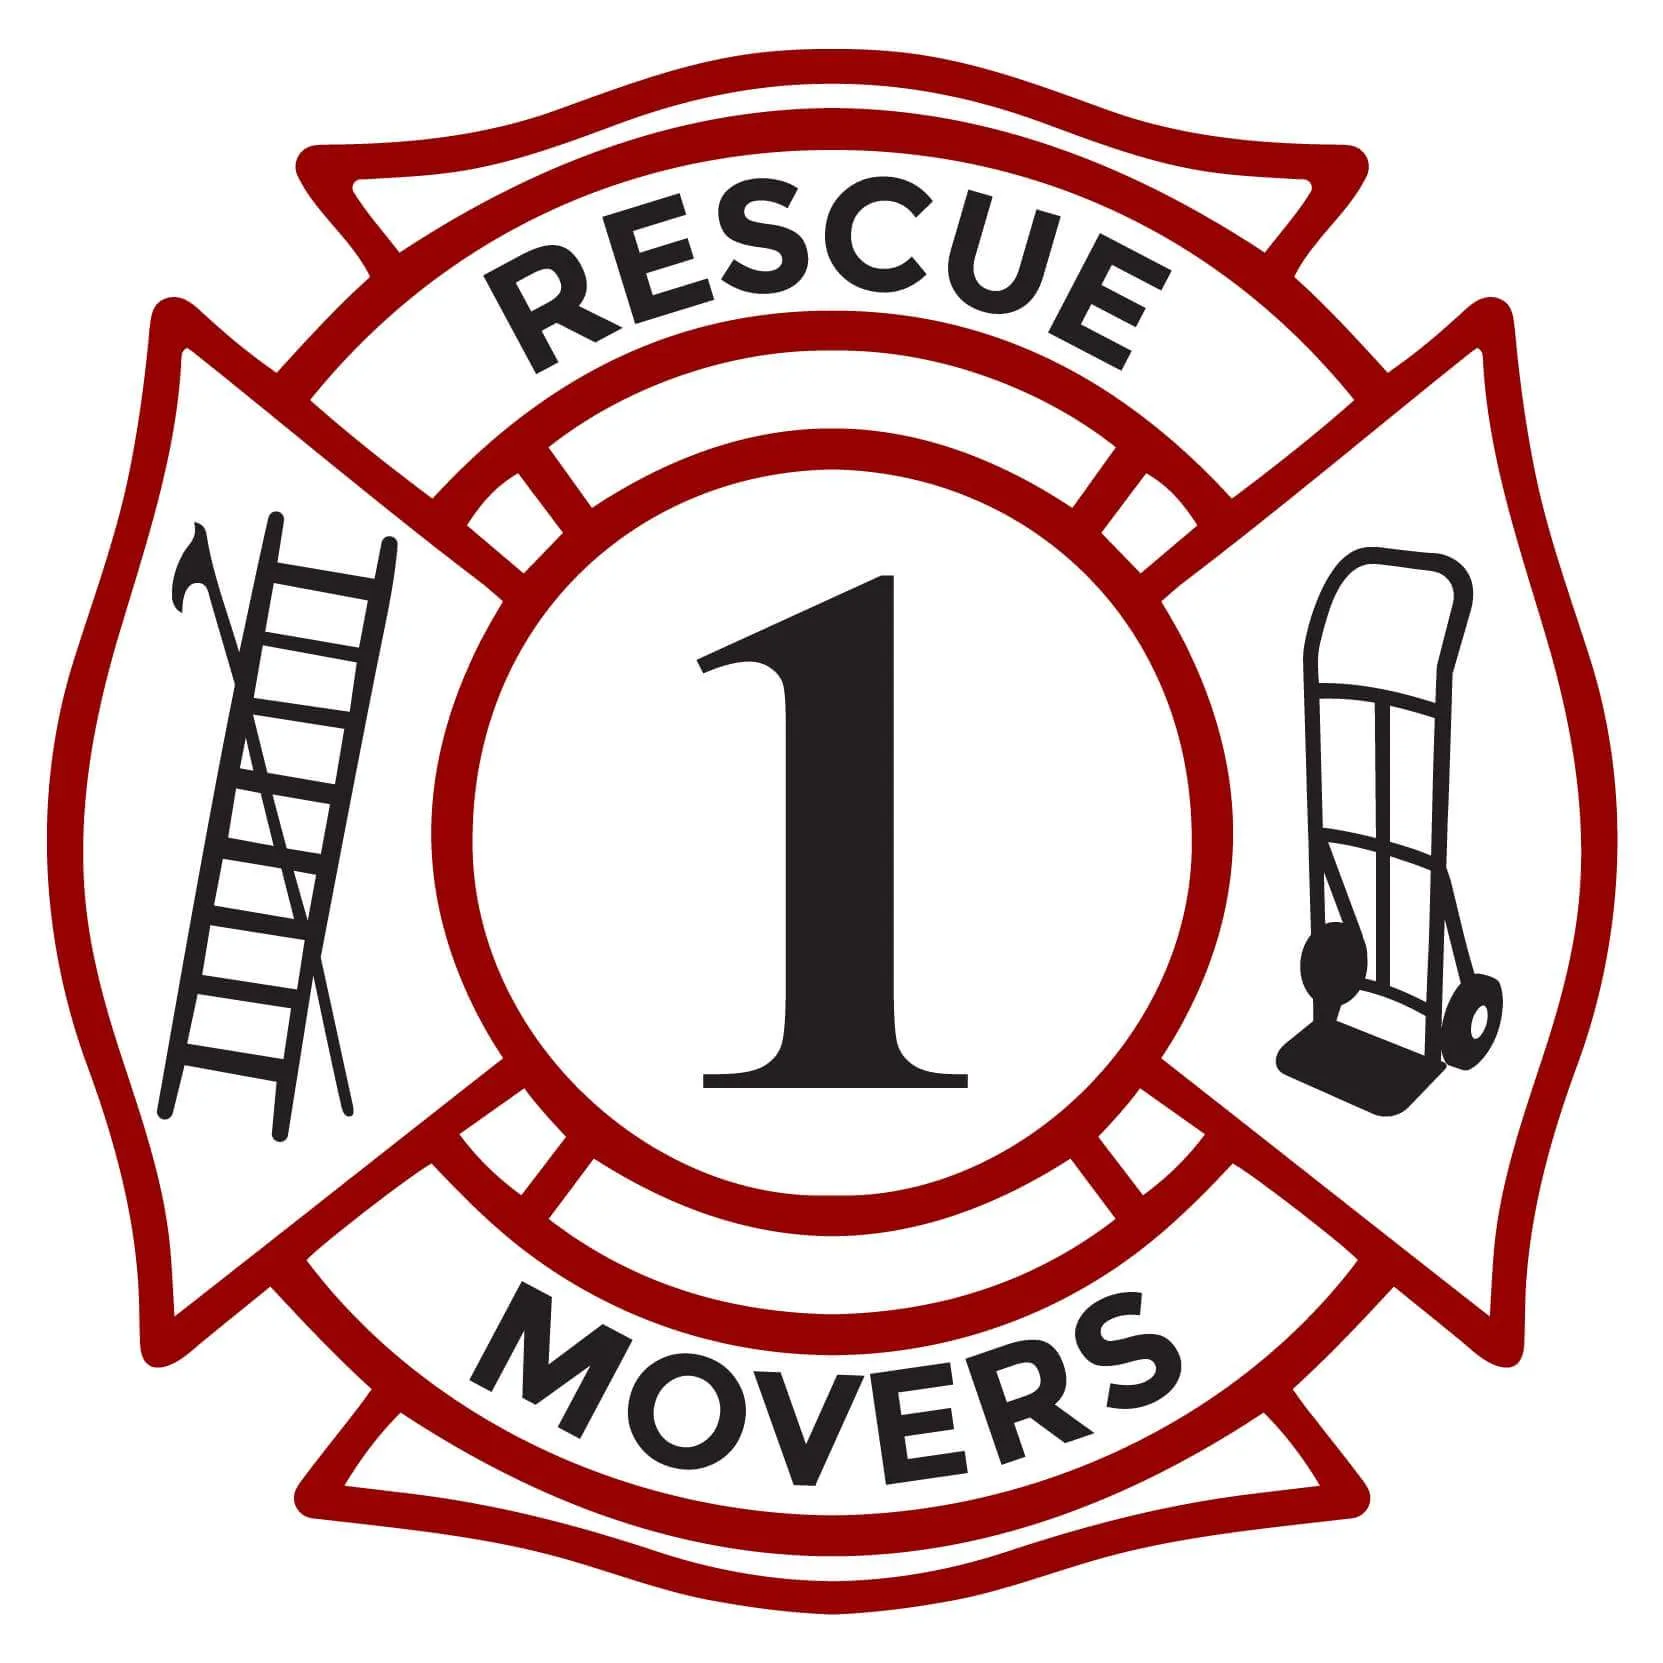 Rescue 1 Movers logo